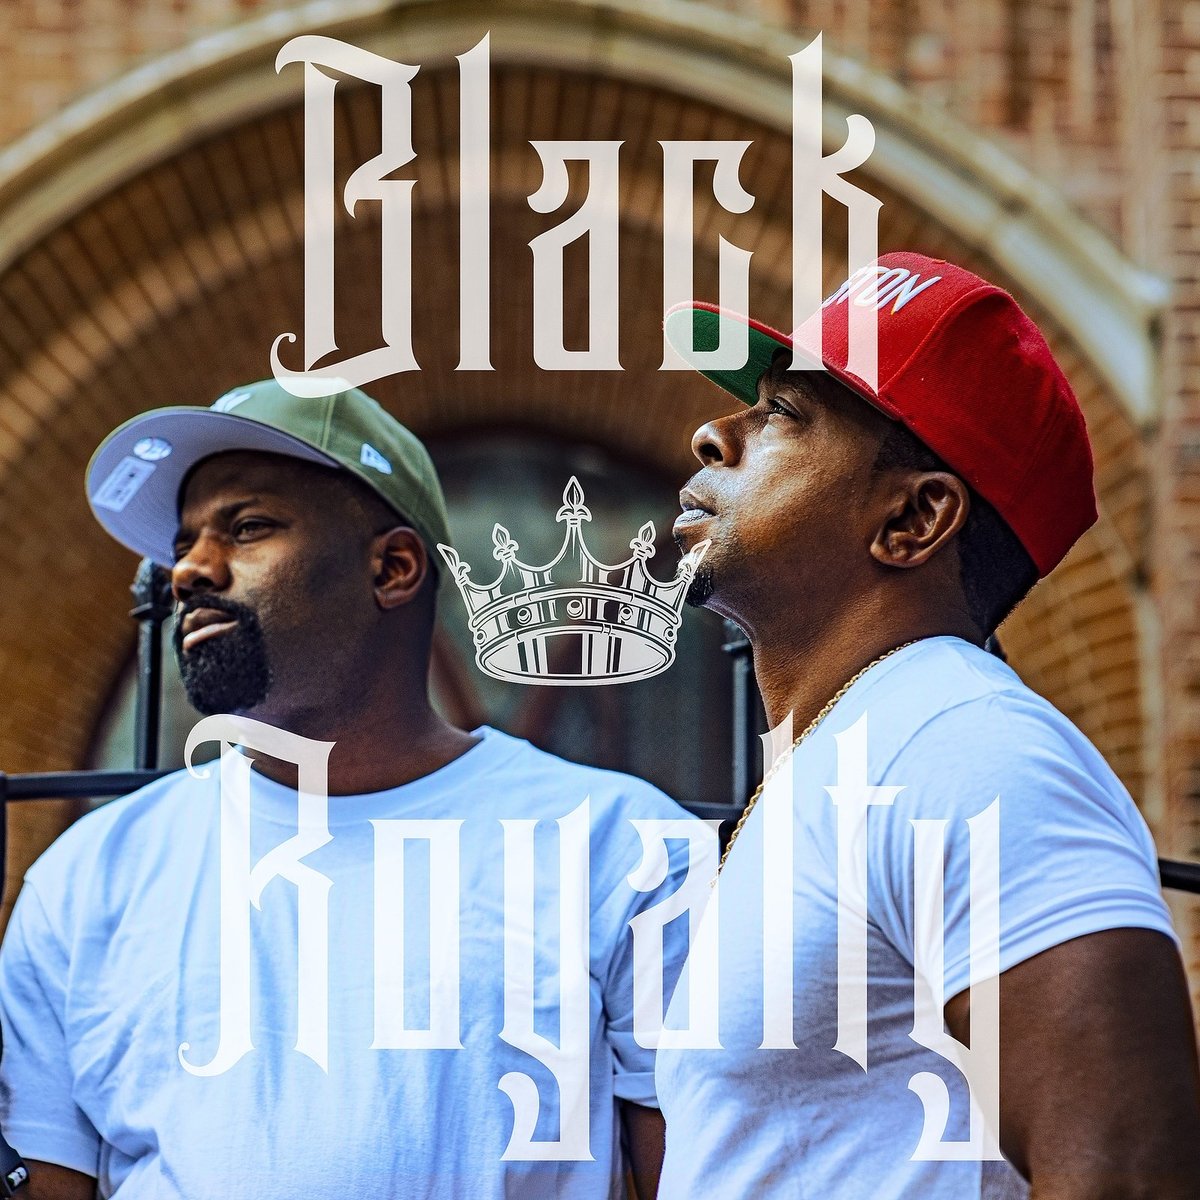 Street Military-Black Royalty-CD-FLAC-2021-AUDiOFiLE Download